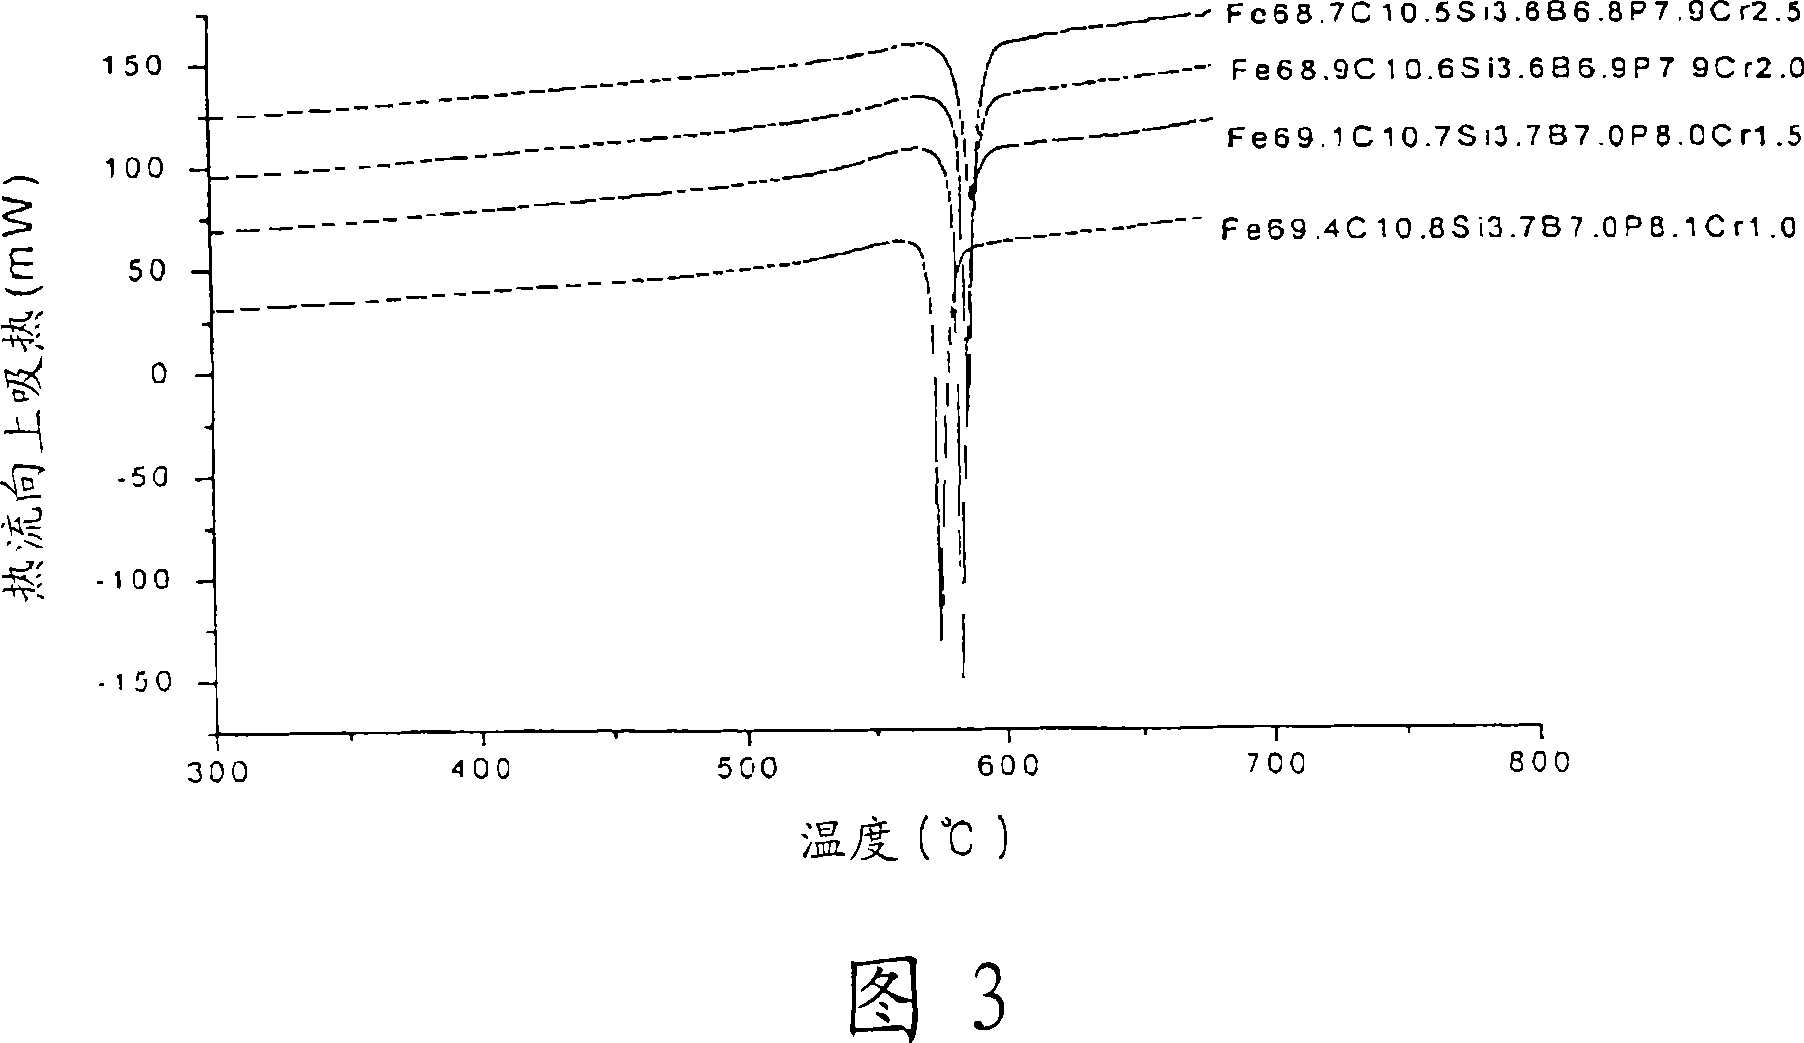 Fe-based bulk amorphous alloy compositions containing more than 5 elements and composites containing the amorphous phase